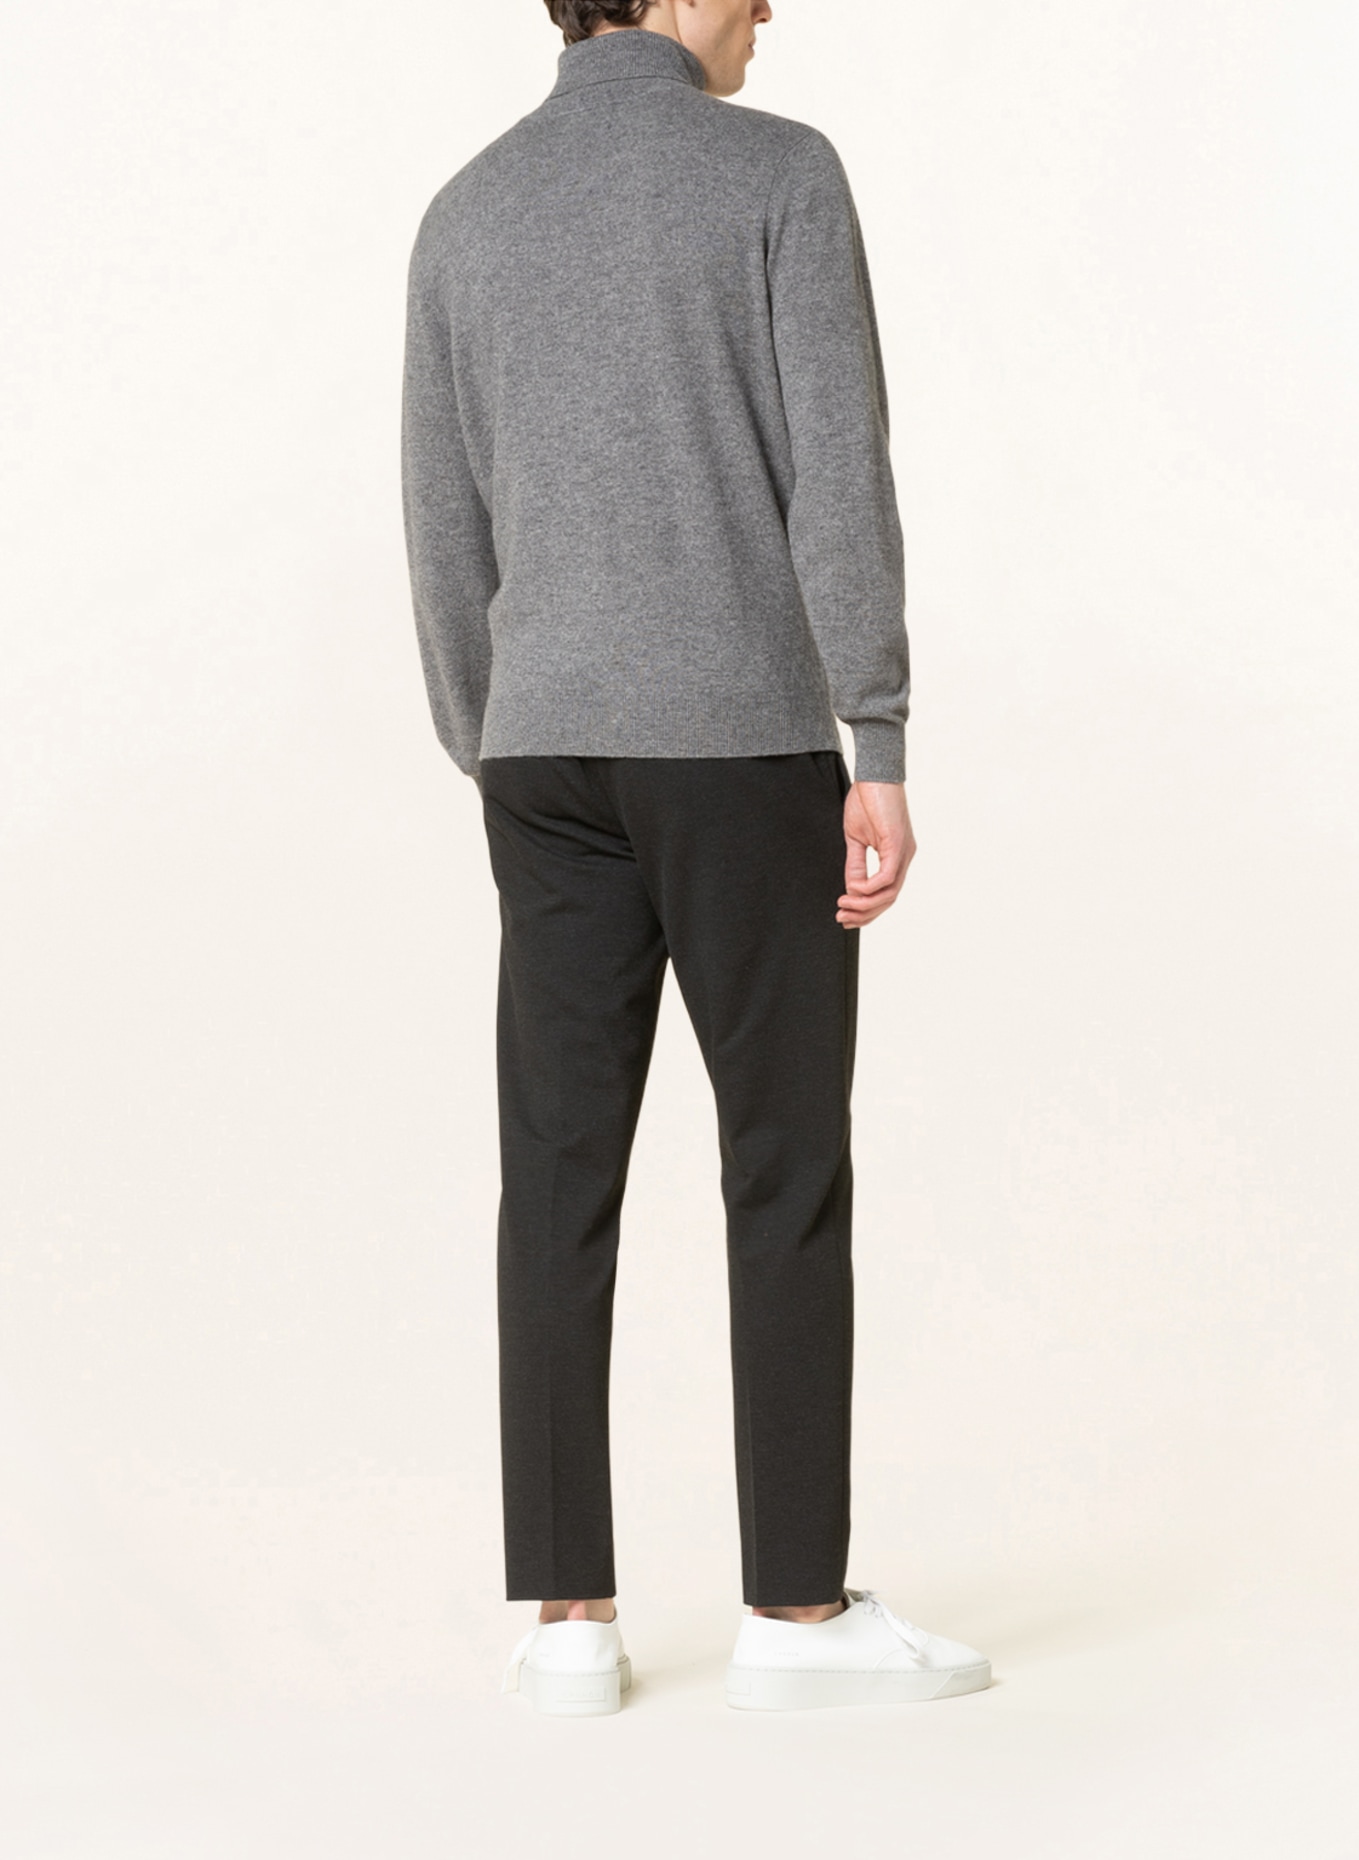 STROKESMAN'S Turtleneck sweater in cashmere, Color: GRAY (Image 3)